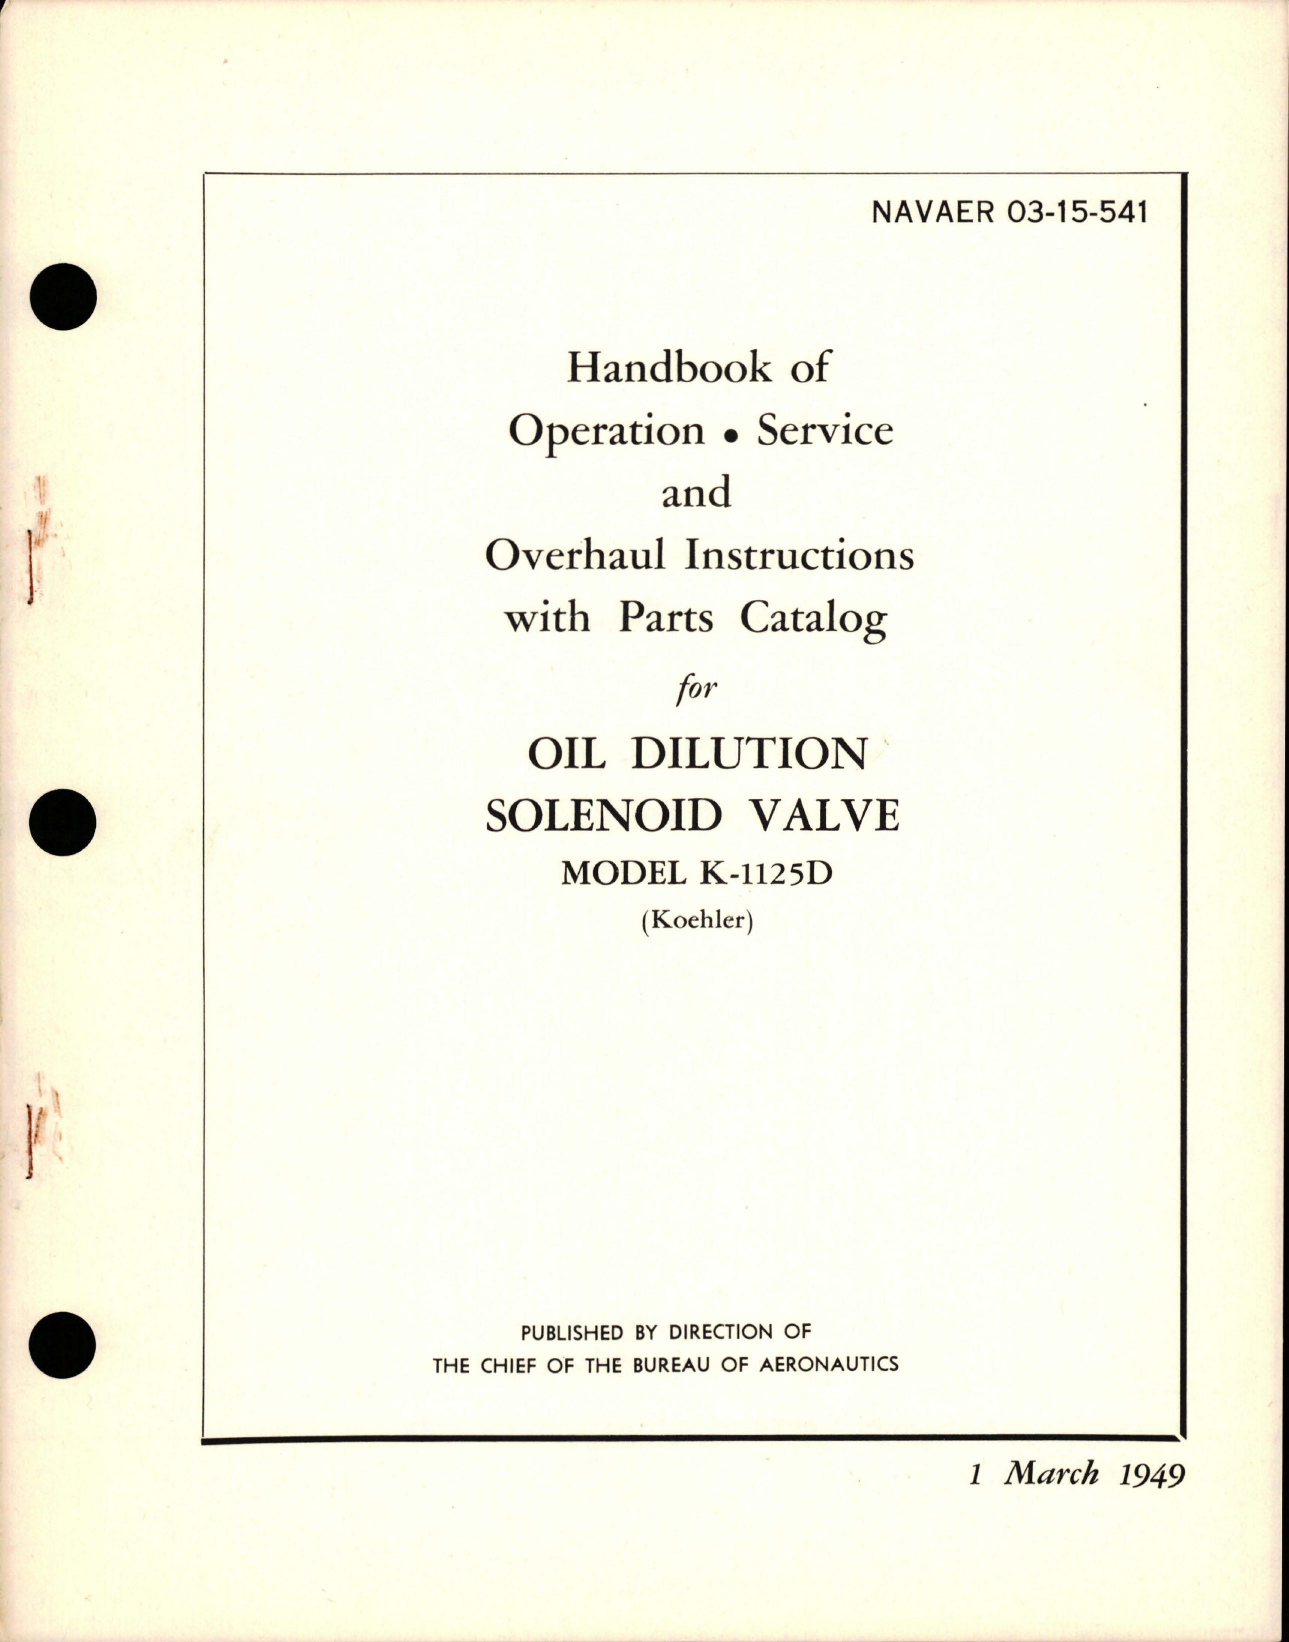 Sample page 1 from AirCorps Library document: Operation, Service, Overhaul Instructions w Parts Catalog for Oil Dilution Solenoid Valve - Model K-1125D